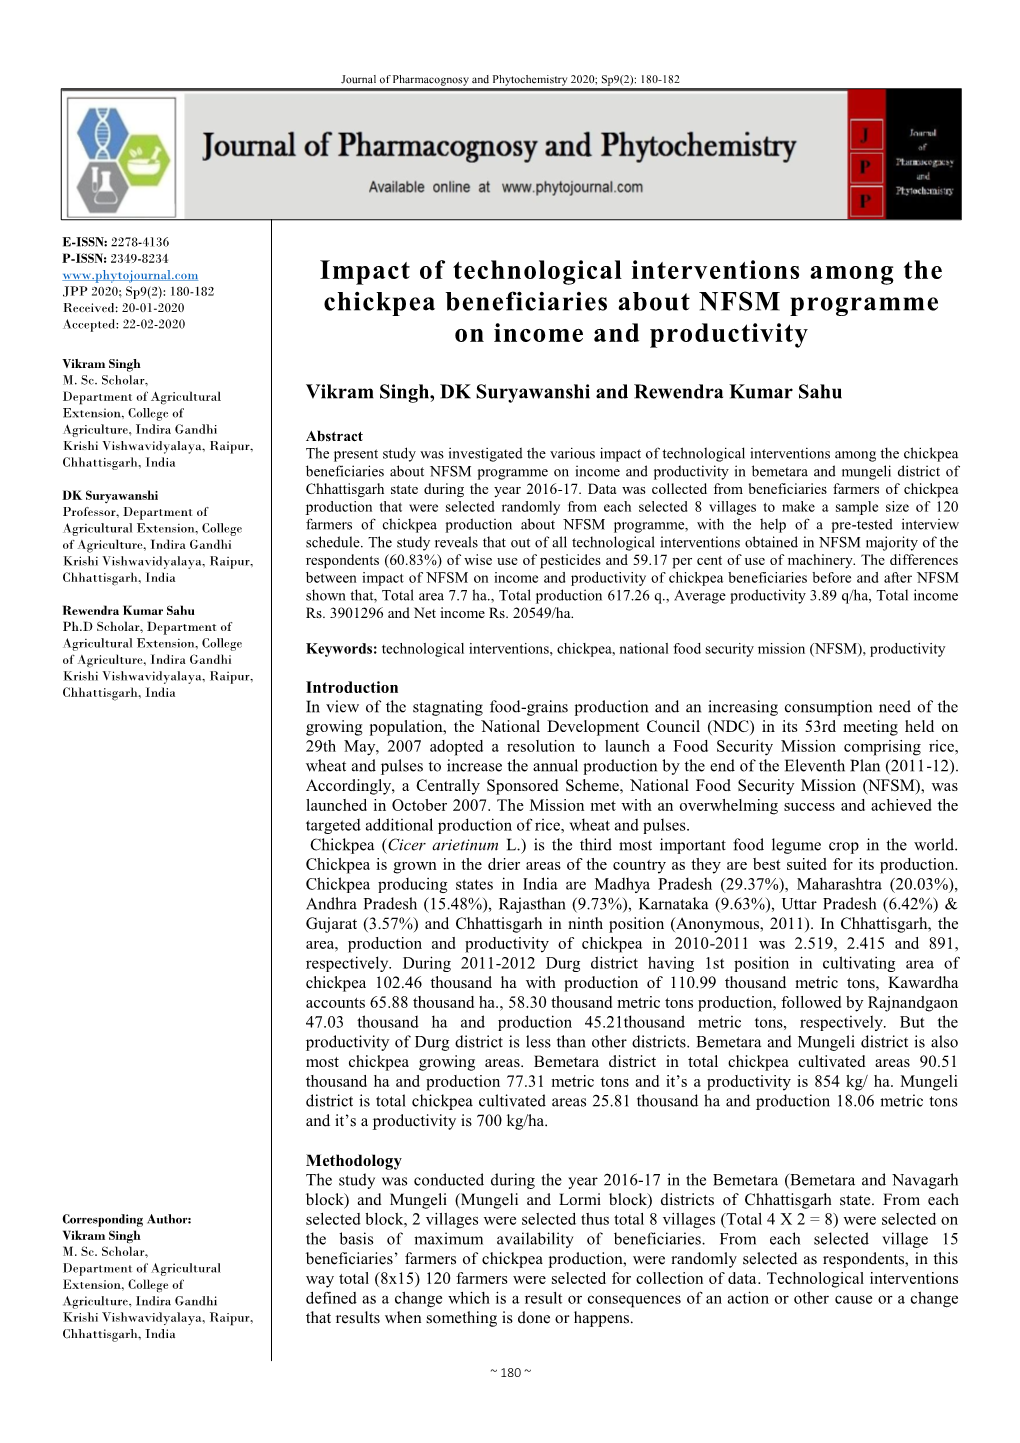 Impact of Technological Interventions Among the Chickpea Beneficiaries